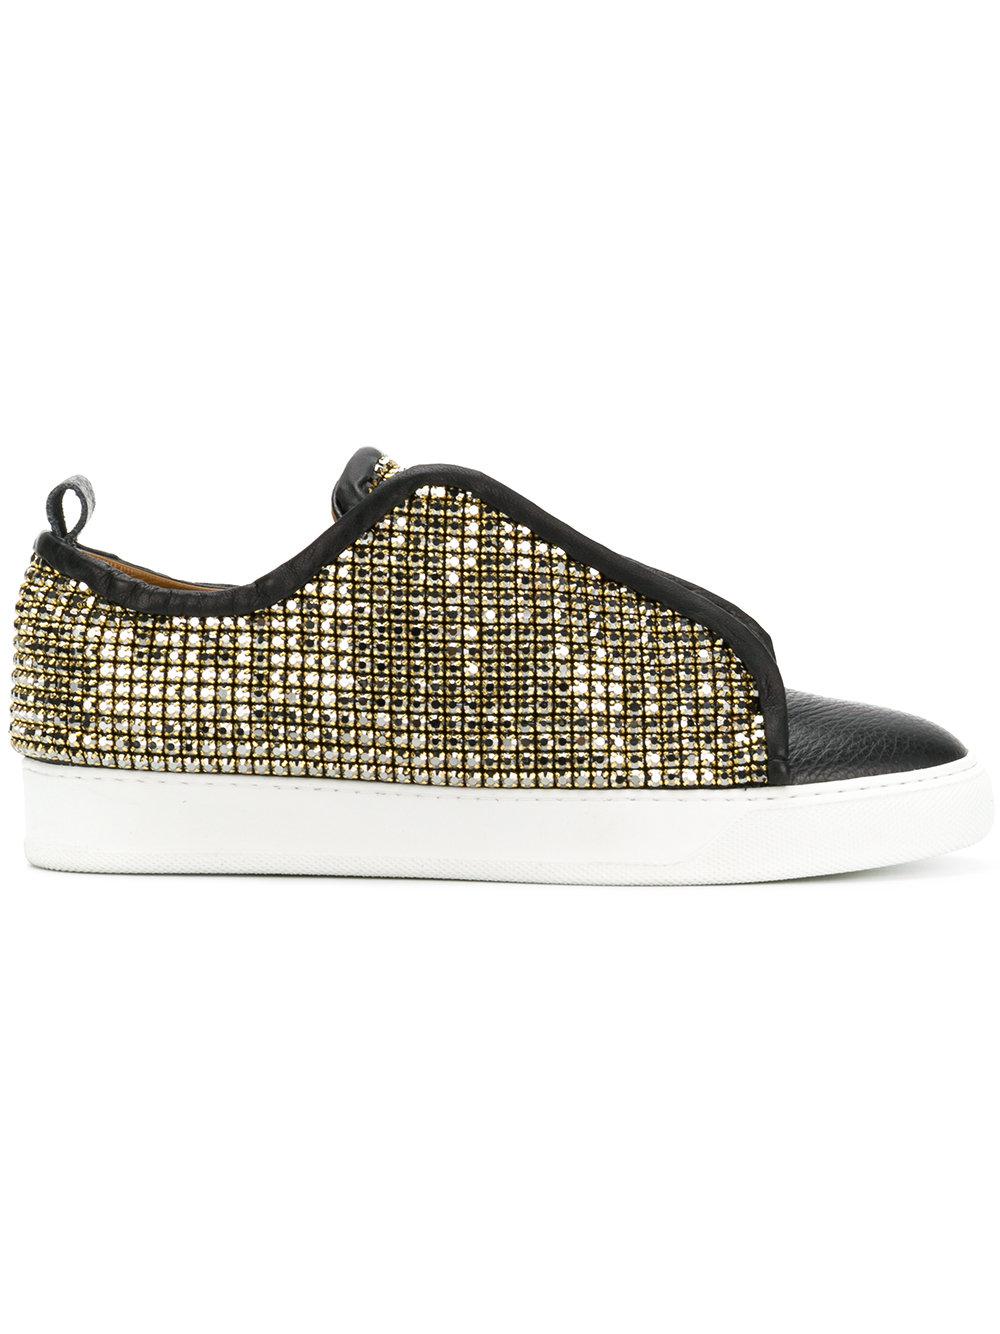 Black Dioniso all black luxury fashion sneakers with a bejeweled backing  Women's - www.vitorcorrea.com